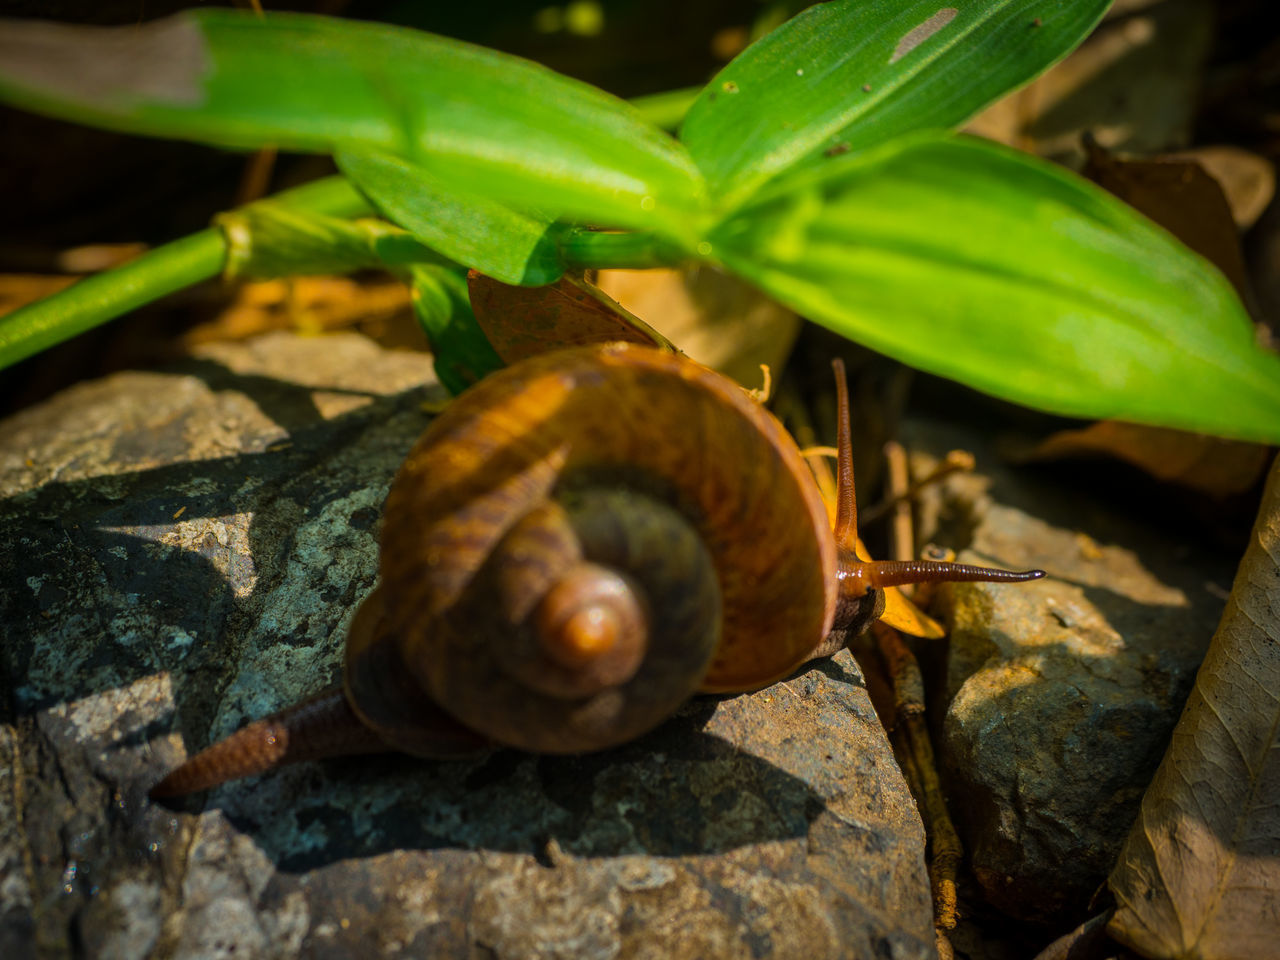 CLOSE-UP OF SNAIL ON A LEAF